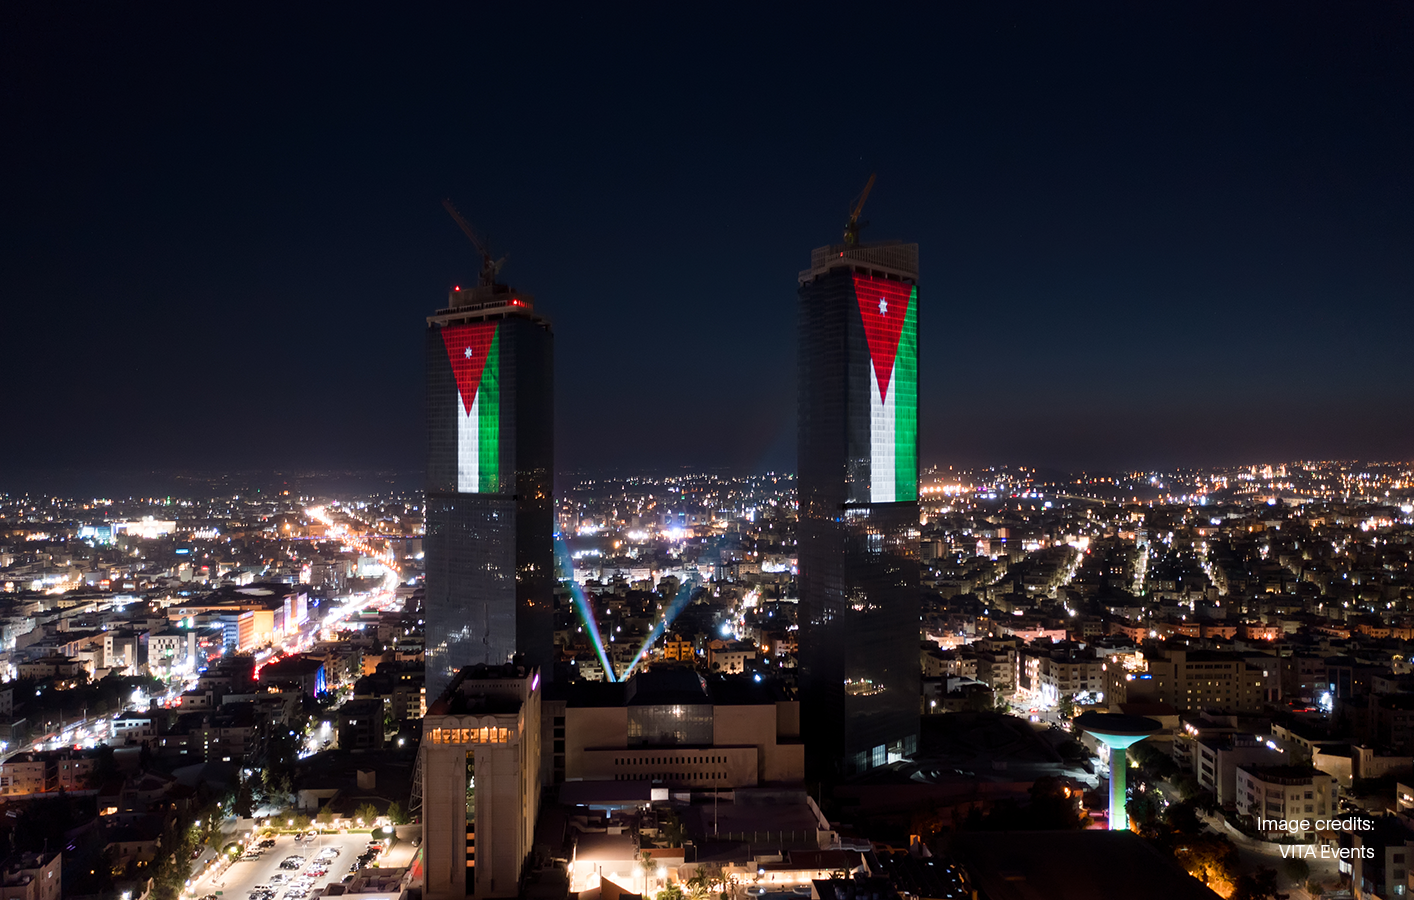 Jordan marks its Independence Day with ambitious display powered by disguise